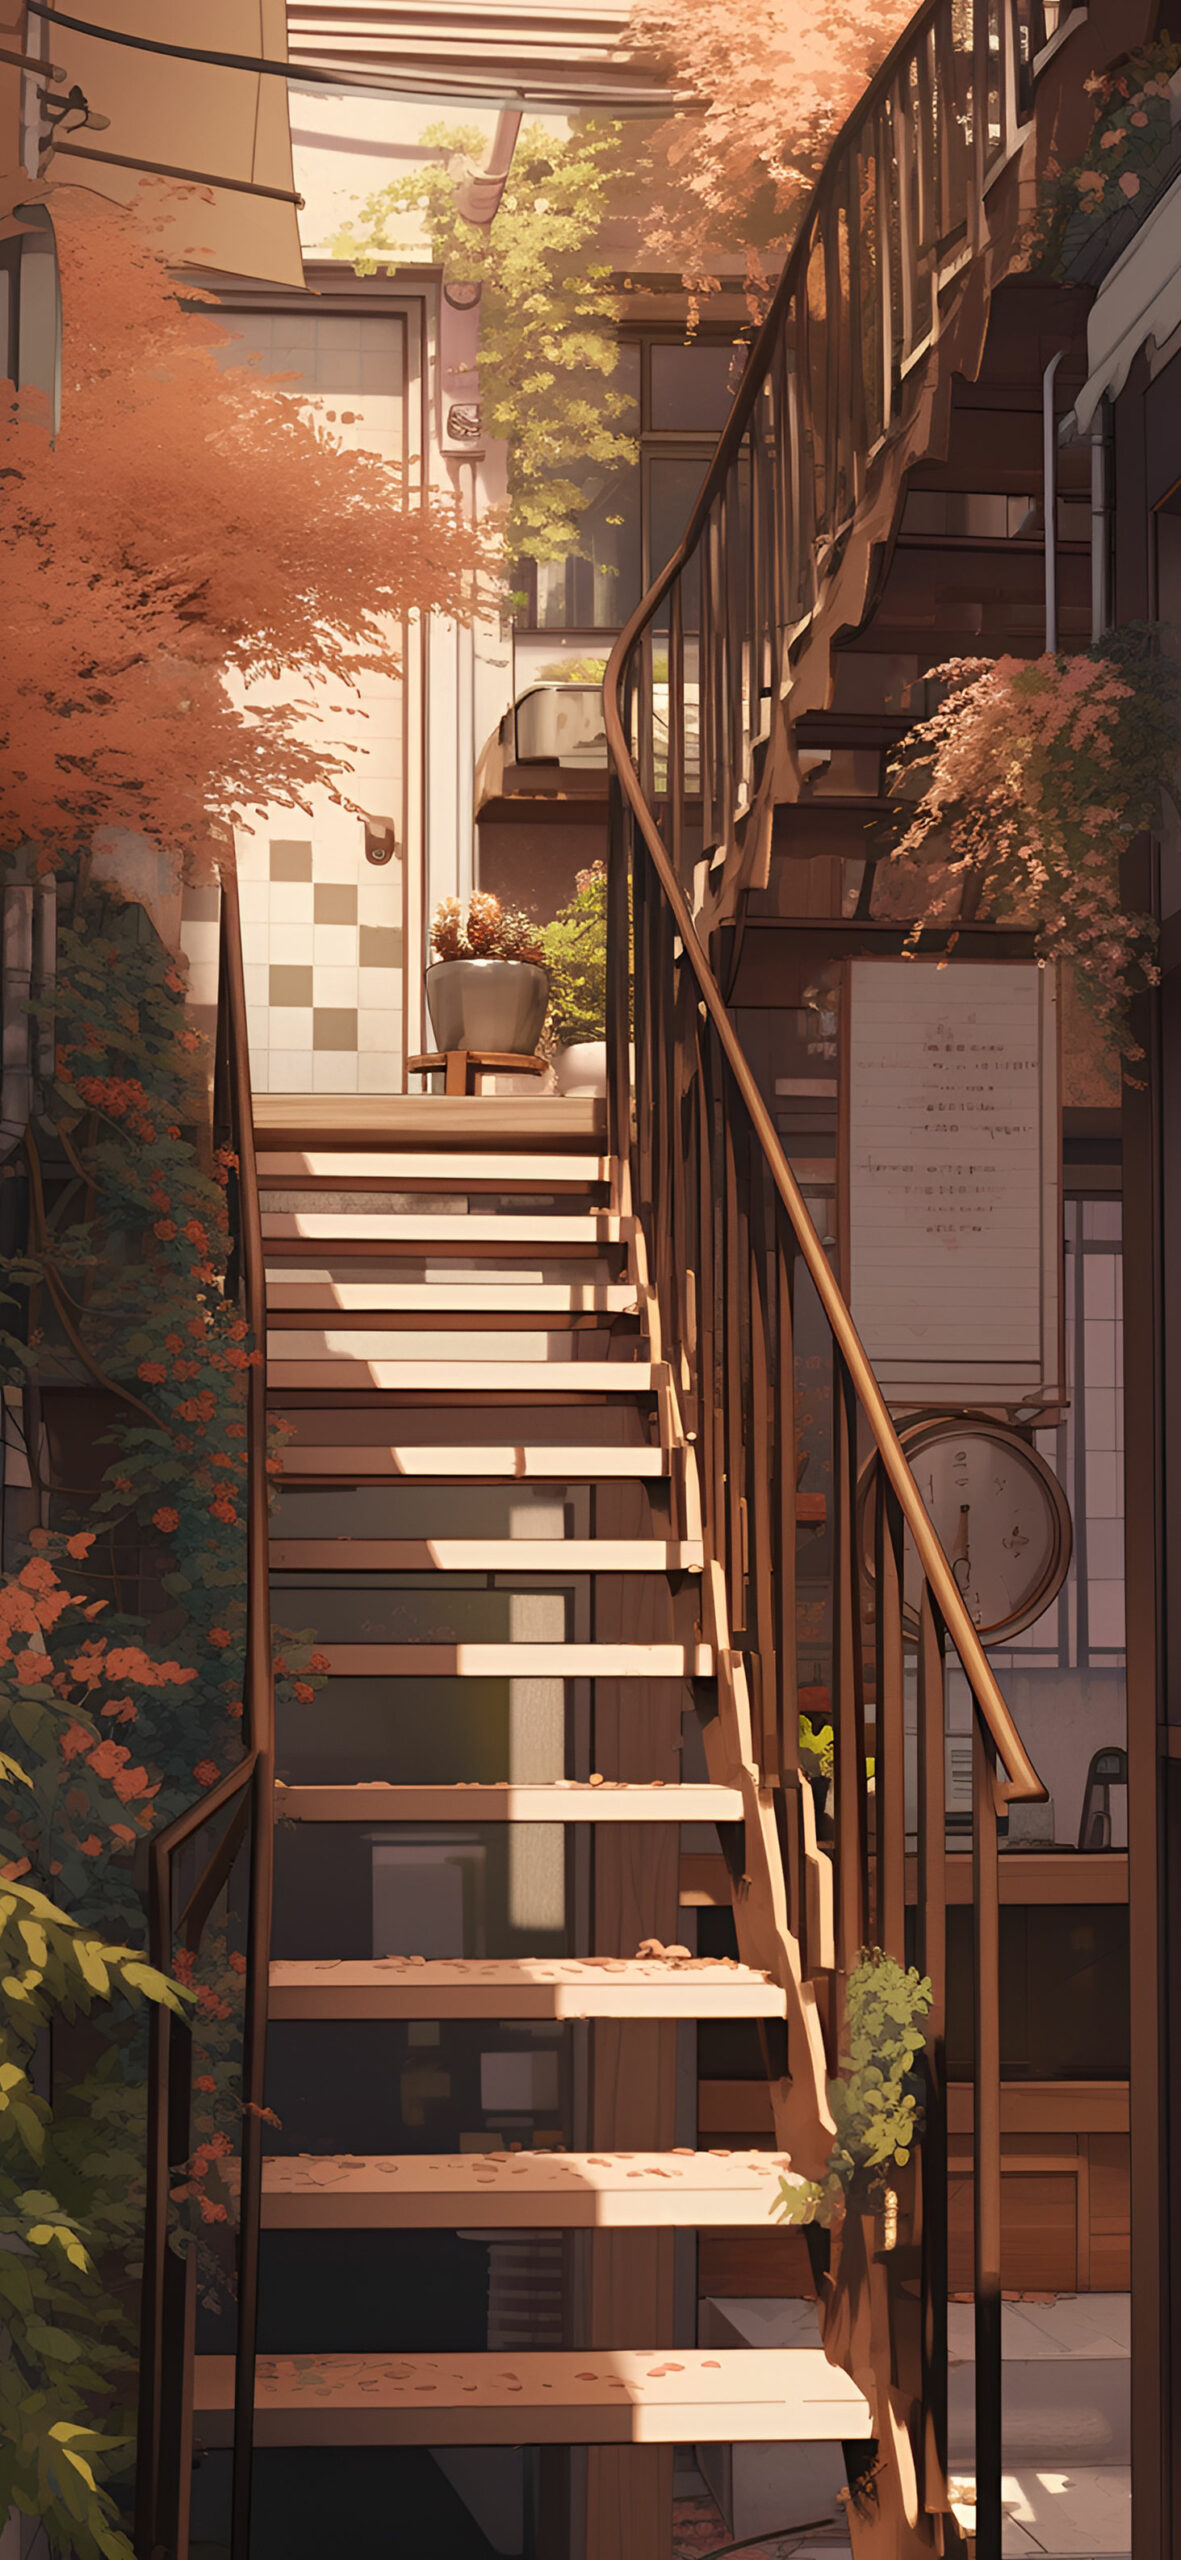 Cozy autumn stairs brown aesthetic wallpaper Warm fall art wal